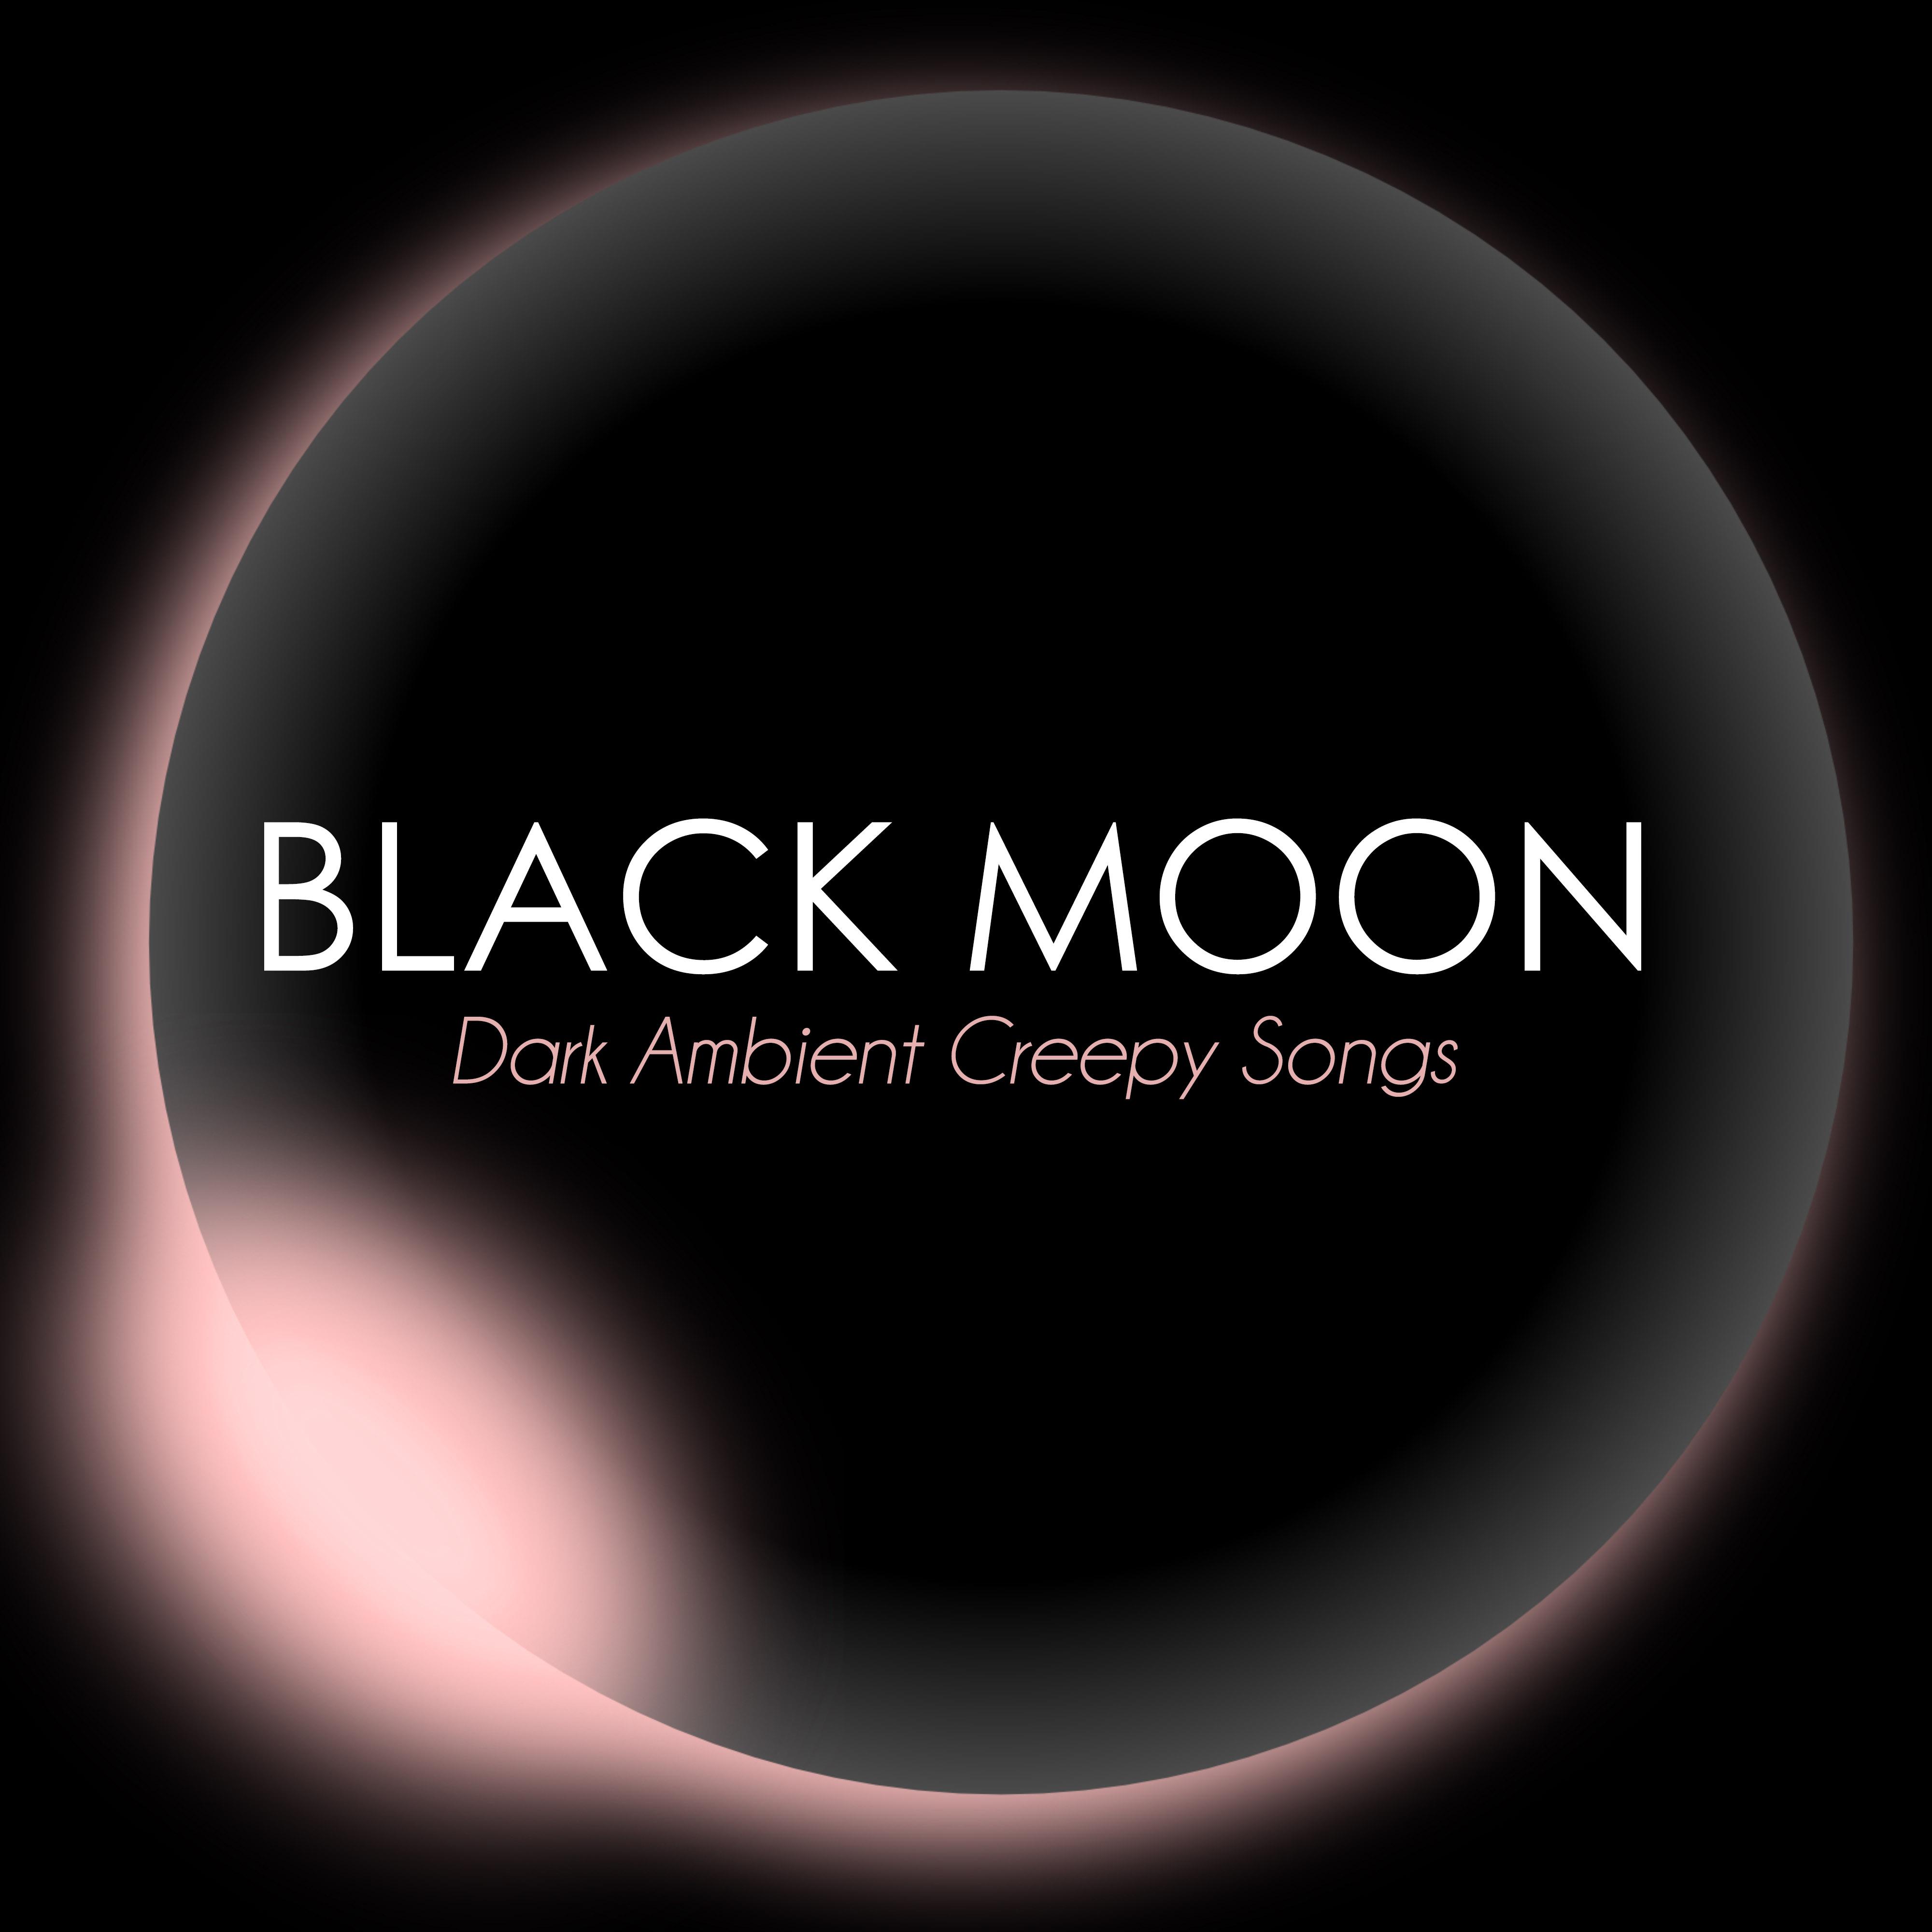 Black Moon - Dark Ambient Creepy Songs, Westworld Sounds of the Night